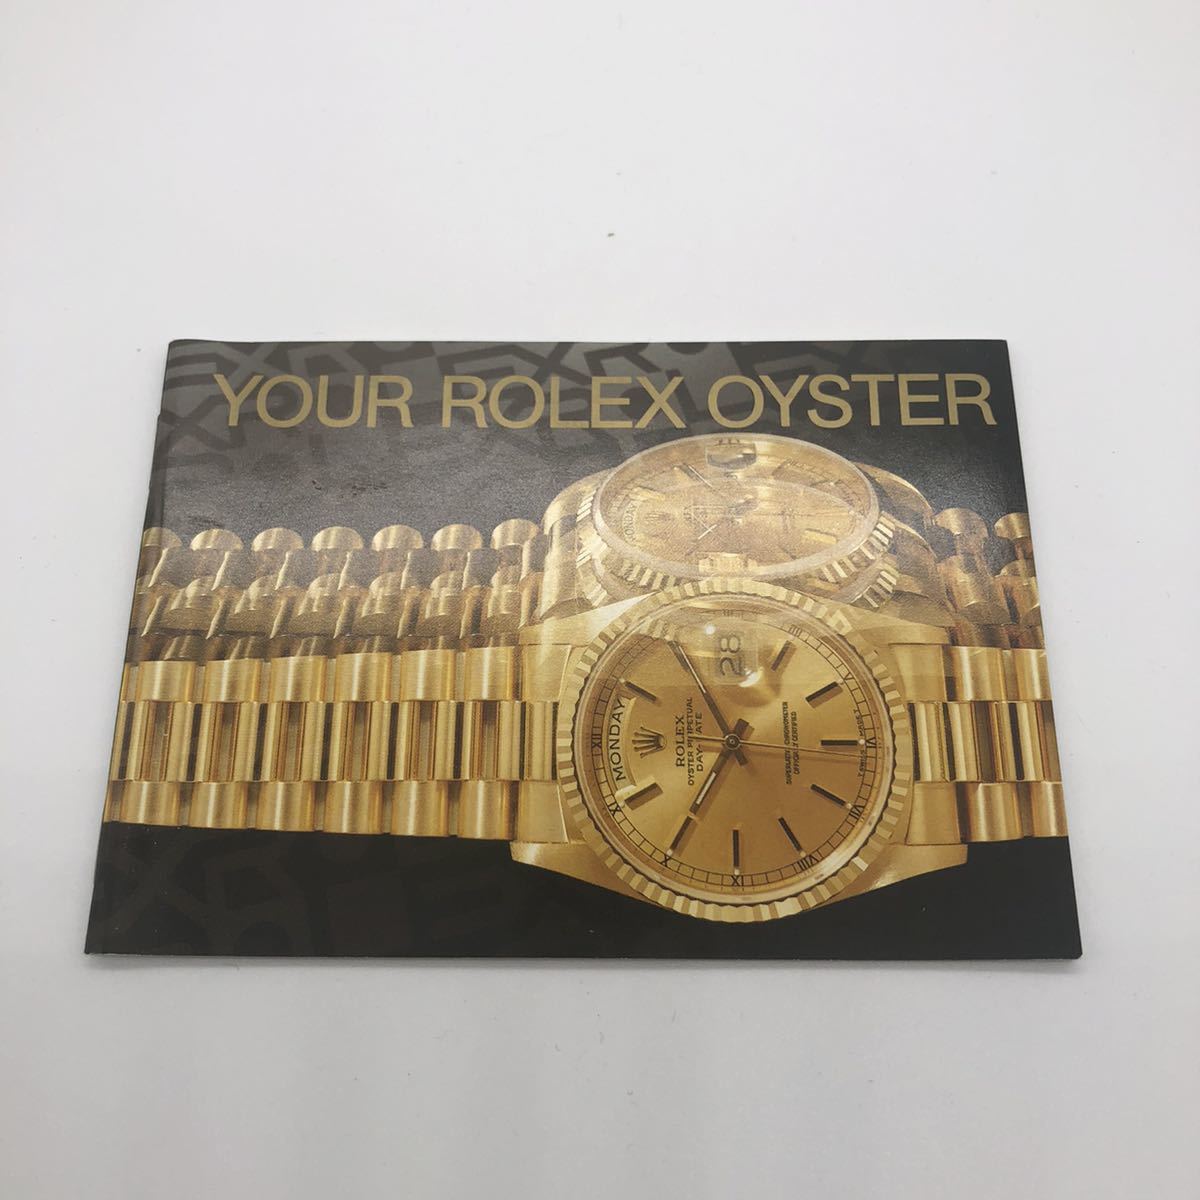 YOUR ROLEX OYSTER 冊子 50冊まとめ売りの画像3